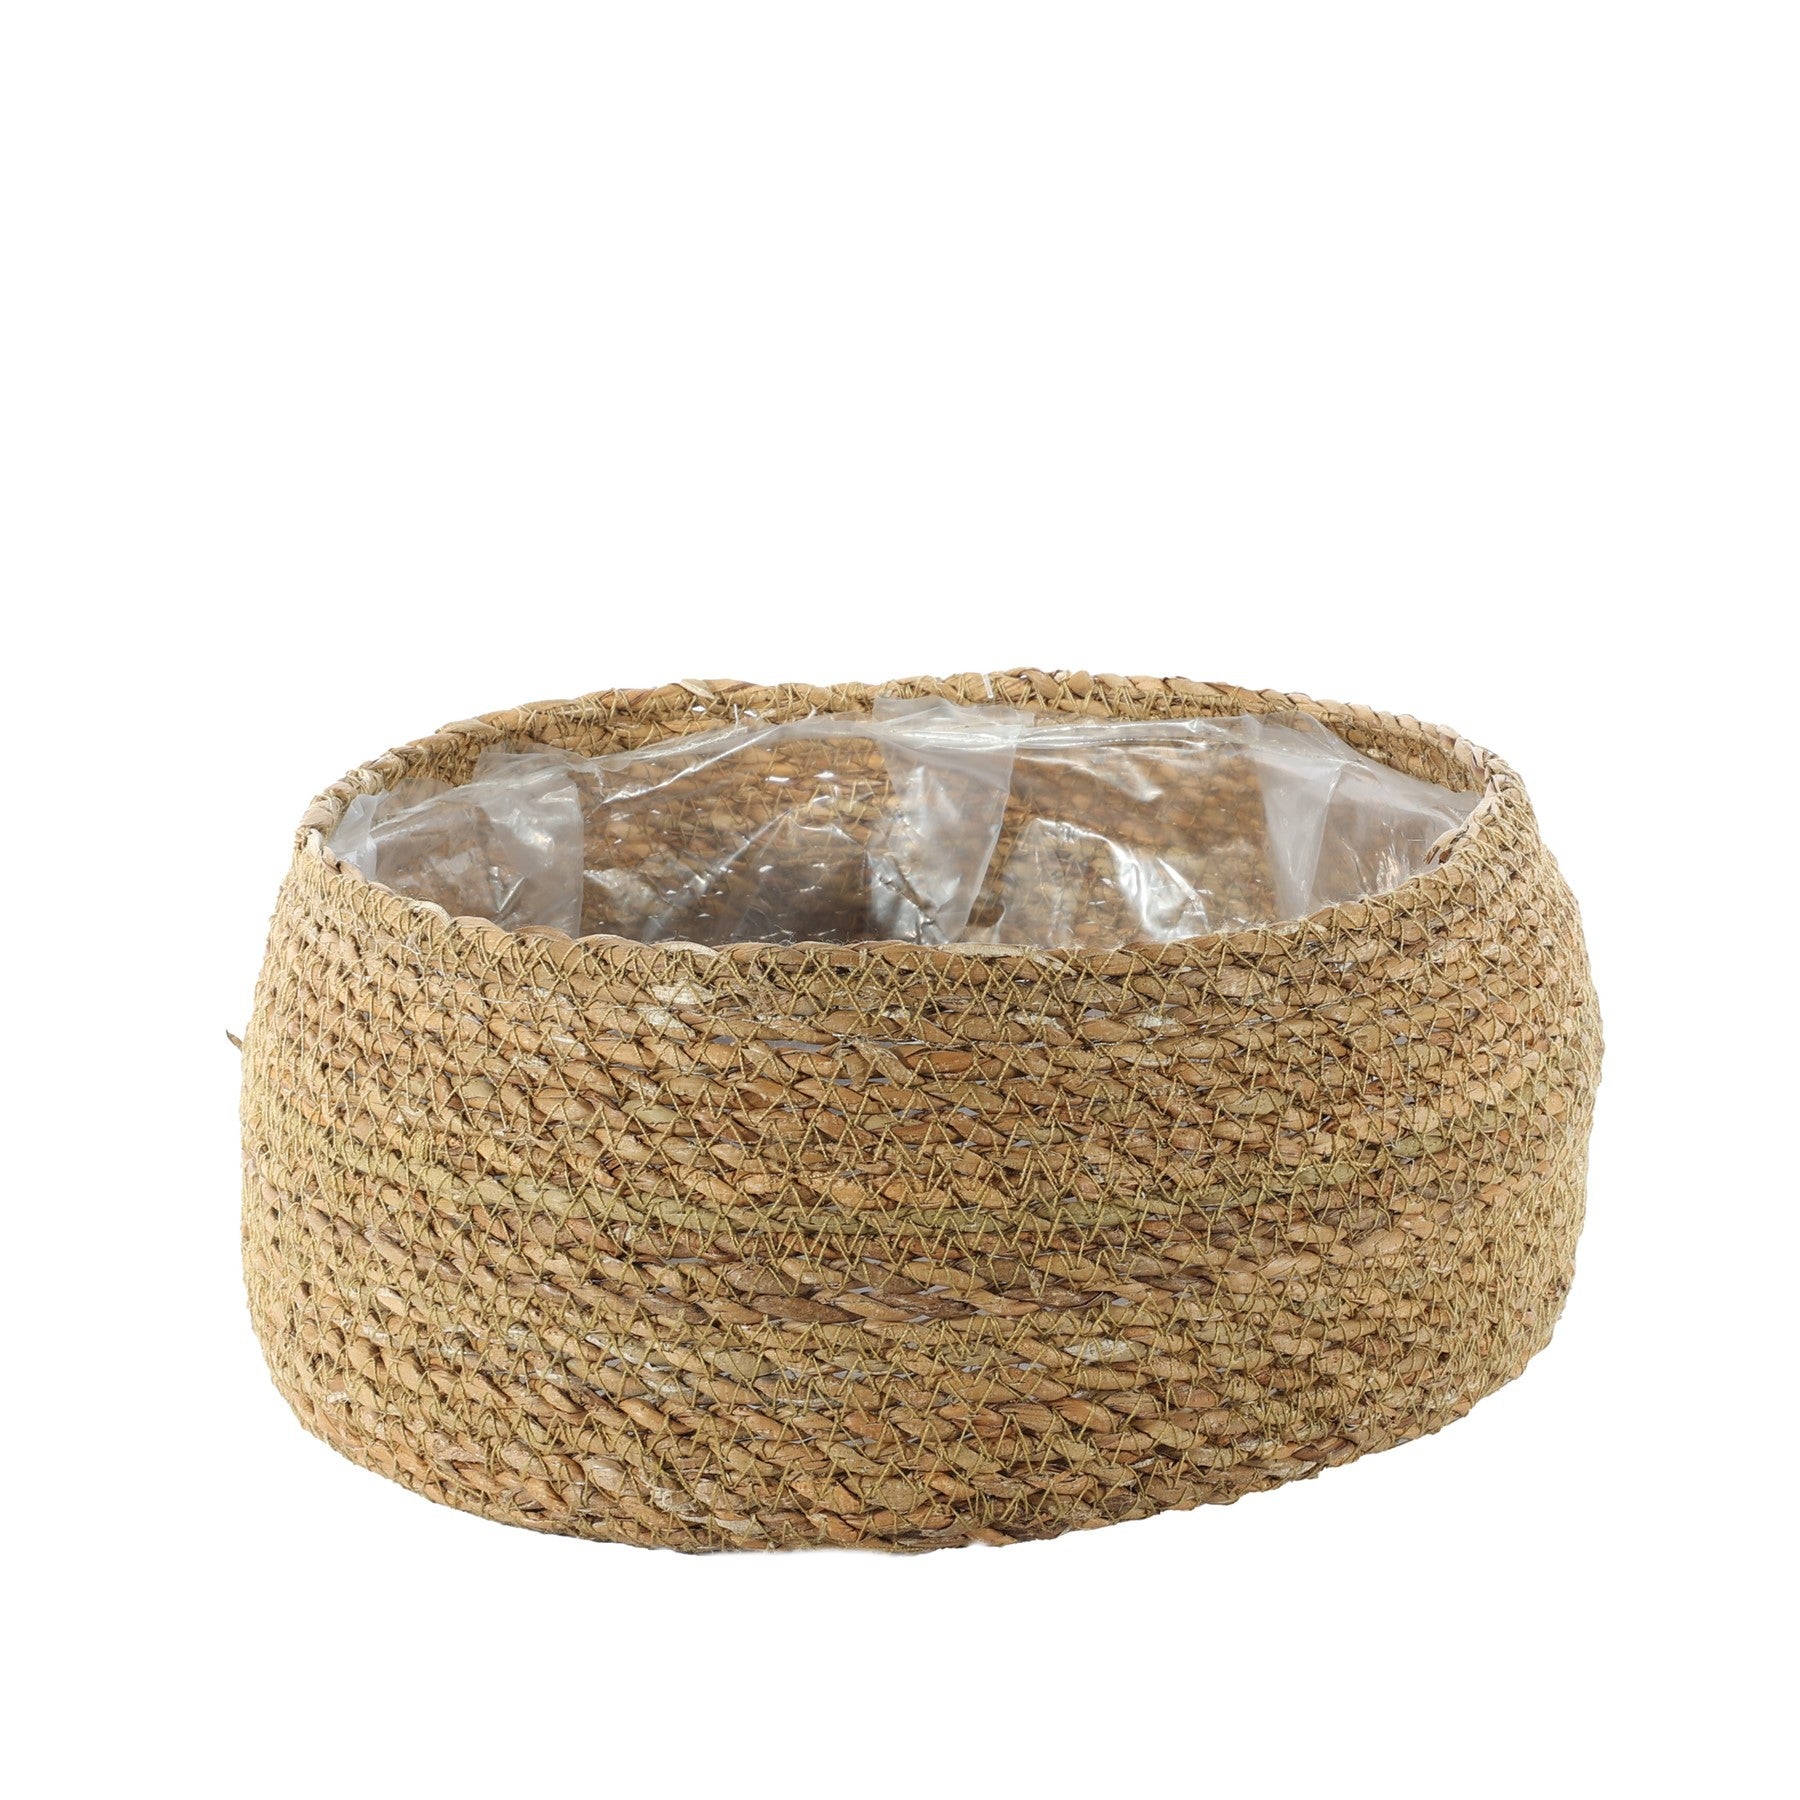 View Natural Seagrass Shallow Basket H10cm x 22cm information